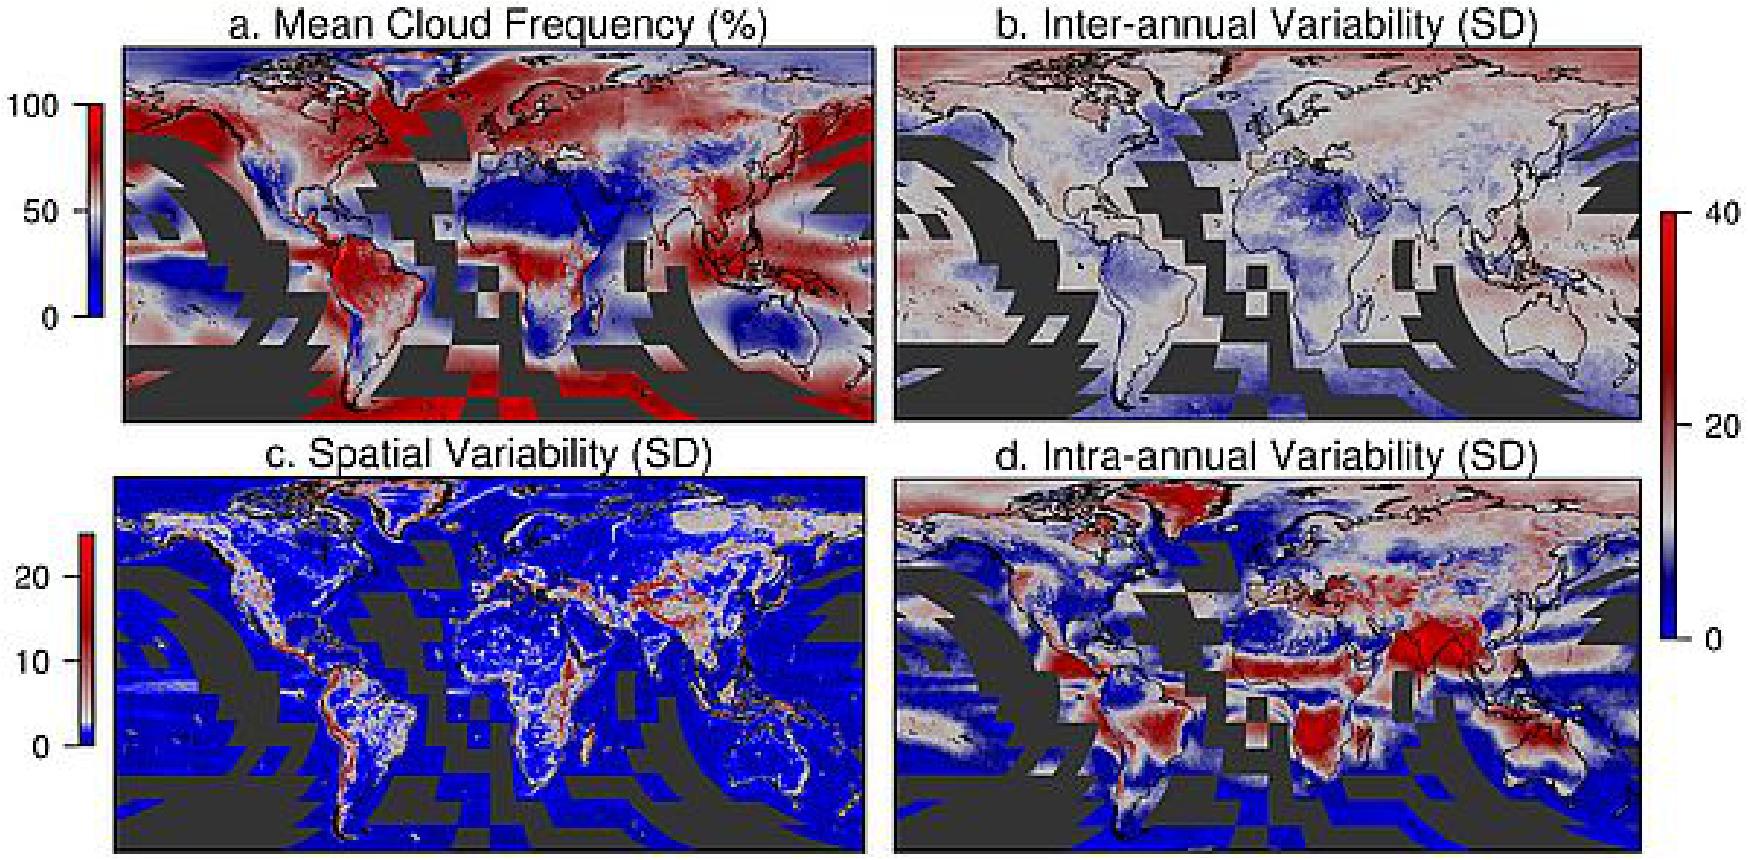 Figure 86: Global 1 km cloud metrics. A) Mean annual cloud frequency (%) over 2000–2014. B) Inter-annual variability in cloud frequency (mean of 12 monthly standard deviations). C) Spatial variability (standard deviation of mean annual cloud frequency within a one-degree, ~110 km, circular moving window). D) Intra-annual variability in cloud frequency (standard deviation of 12 monthly mean cloud frequencies). Grey indicates the (A) median global cloud frequency (51%) and (B,D) median inter-annual variability (11%), blues indicate areas with below-median values, and reds indicate areas with higher-than-median values. Data are available only for MODIS land tiles, resulting in missing data in black tiles over oceans (image credit: A. M. Wilson, W. Jetz)